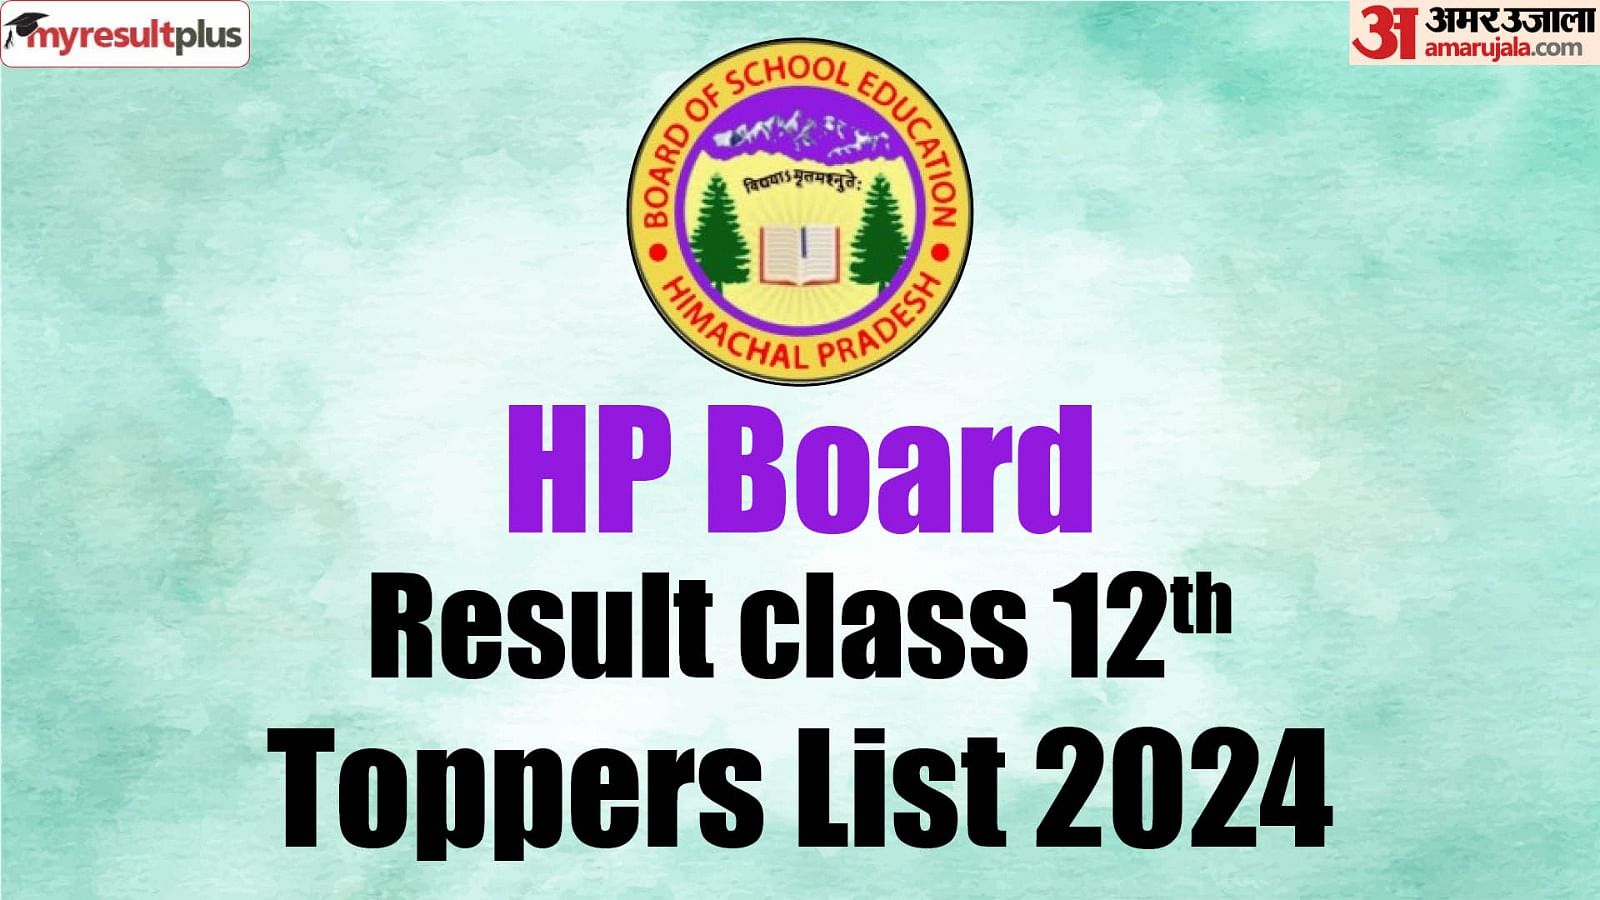 HPBOSE Class 12 Result 2024 declared, Girls outperformed boys this year, 30 girls among 41 toppers